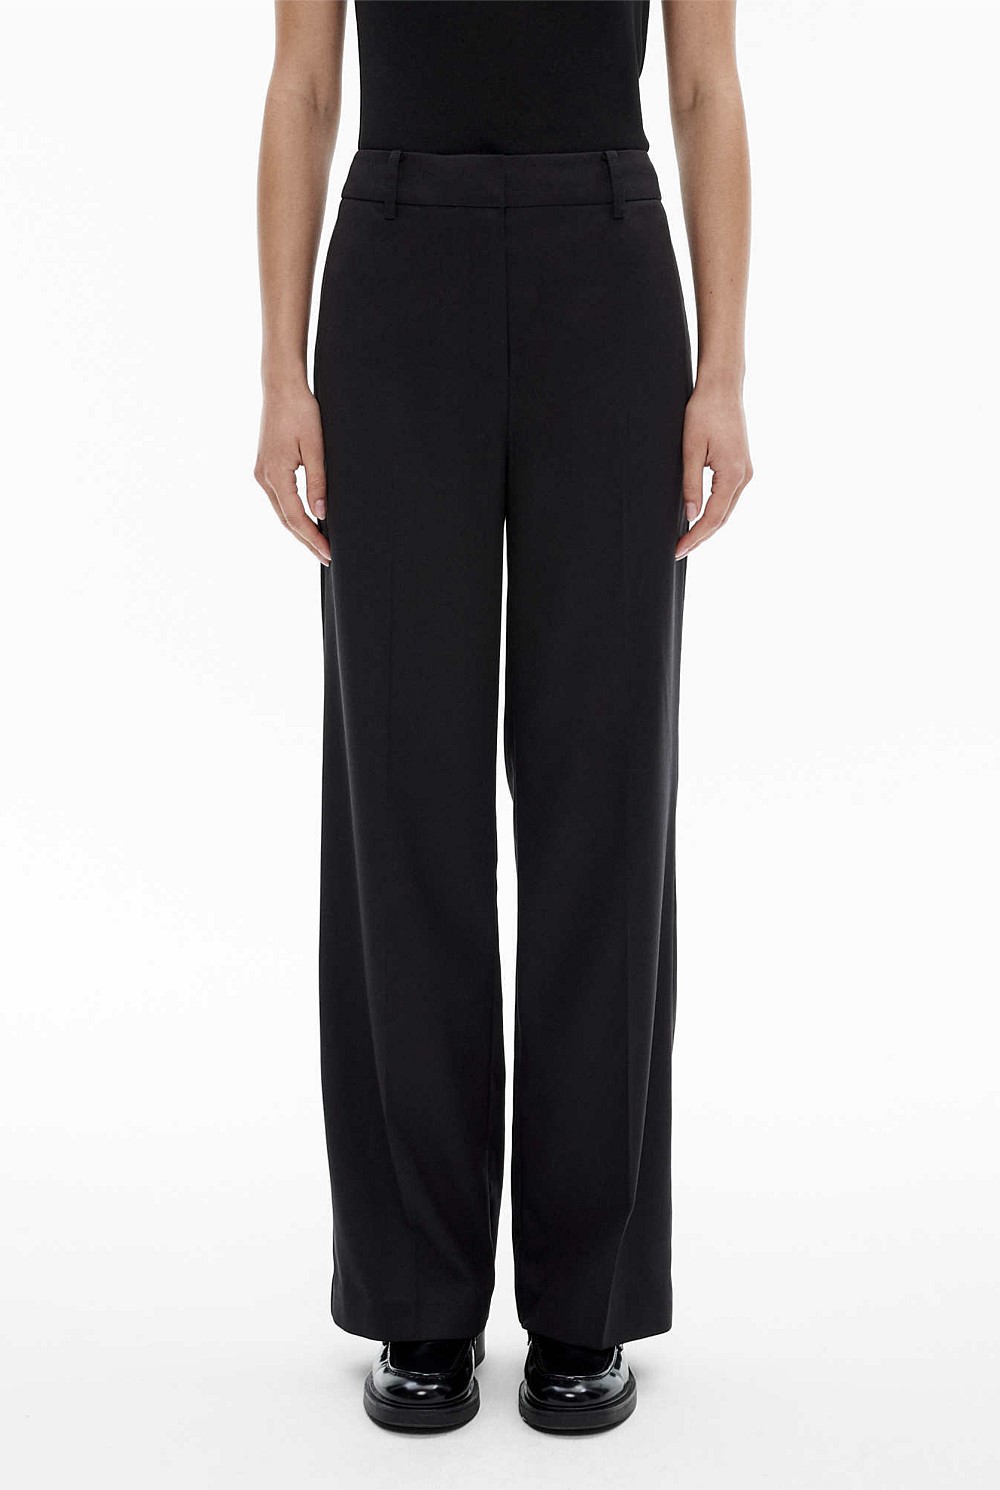 Shop Women's High Waisted & High Rise Pants Online - Witchery